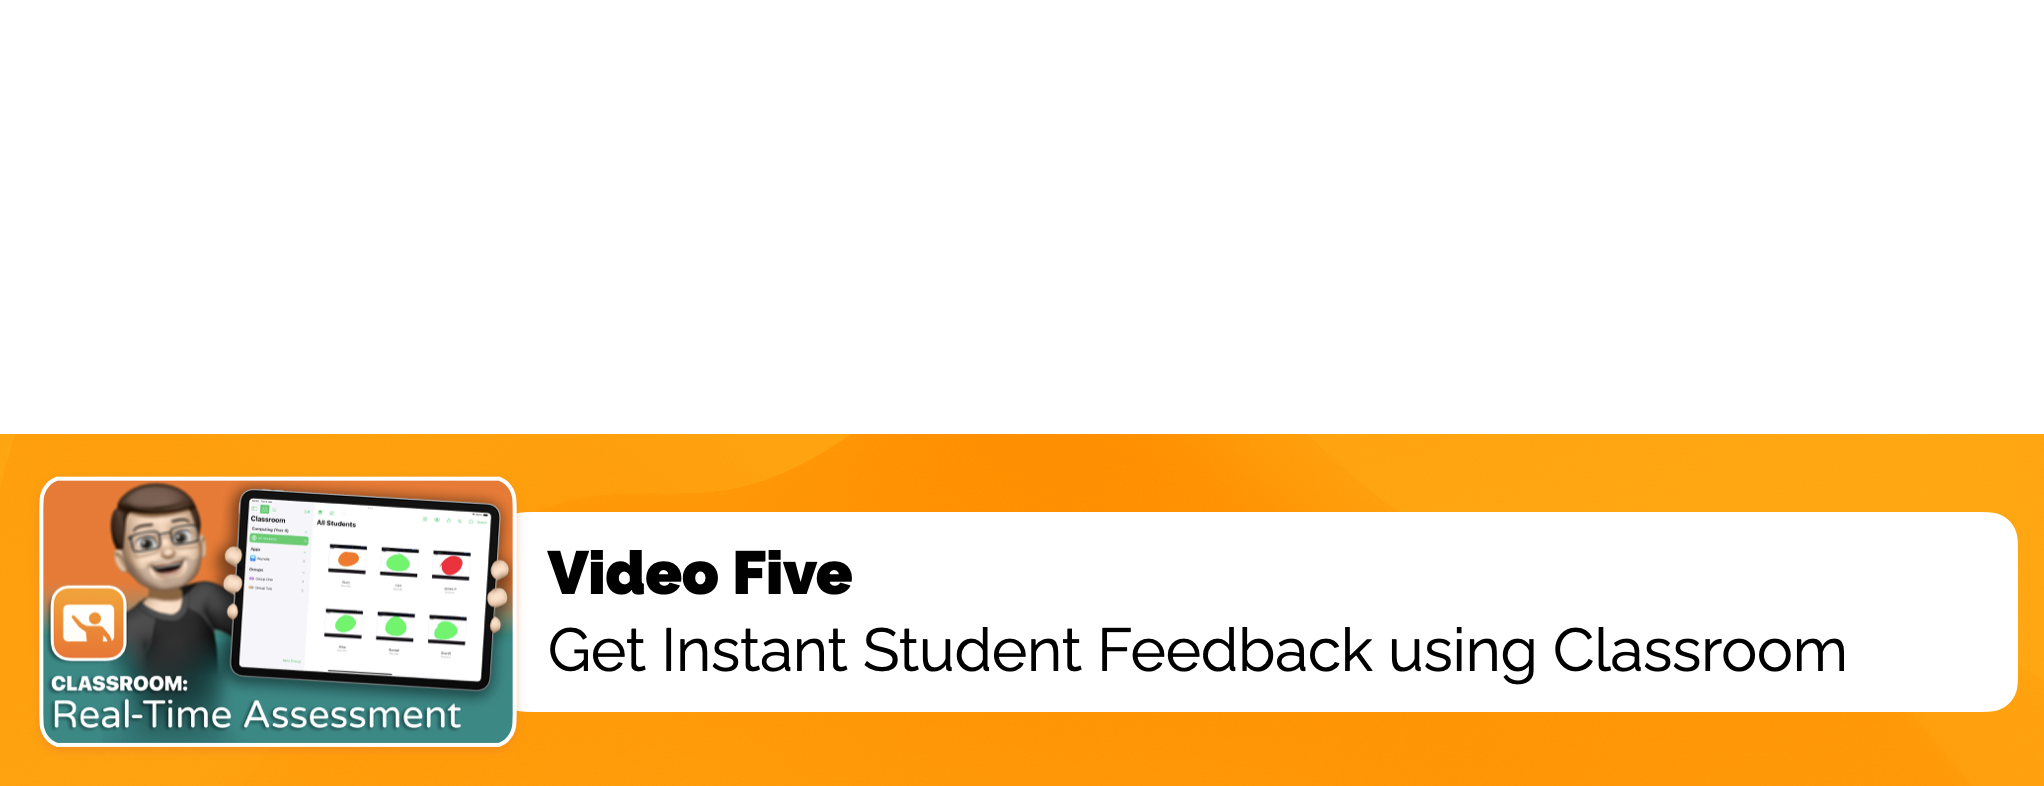 Video Five: Get Instant Student Feedback using Classroom